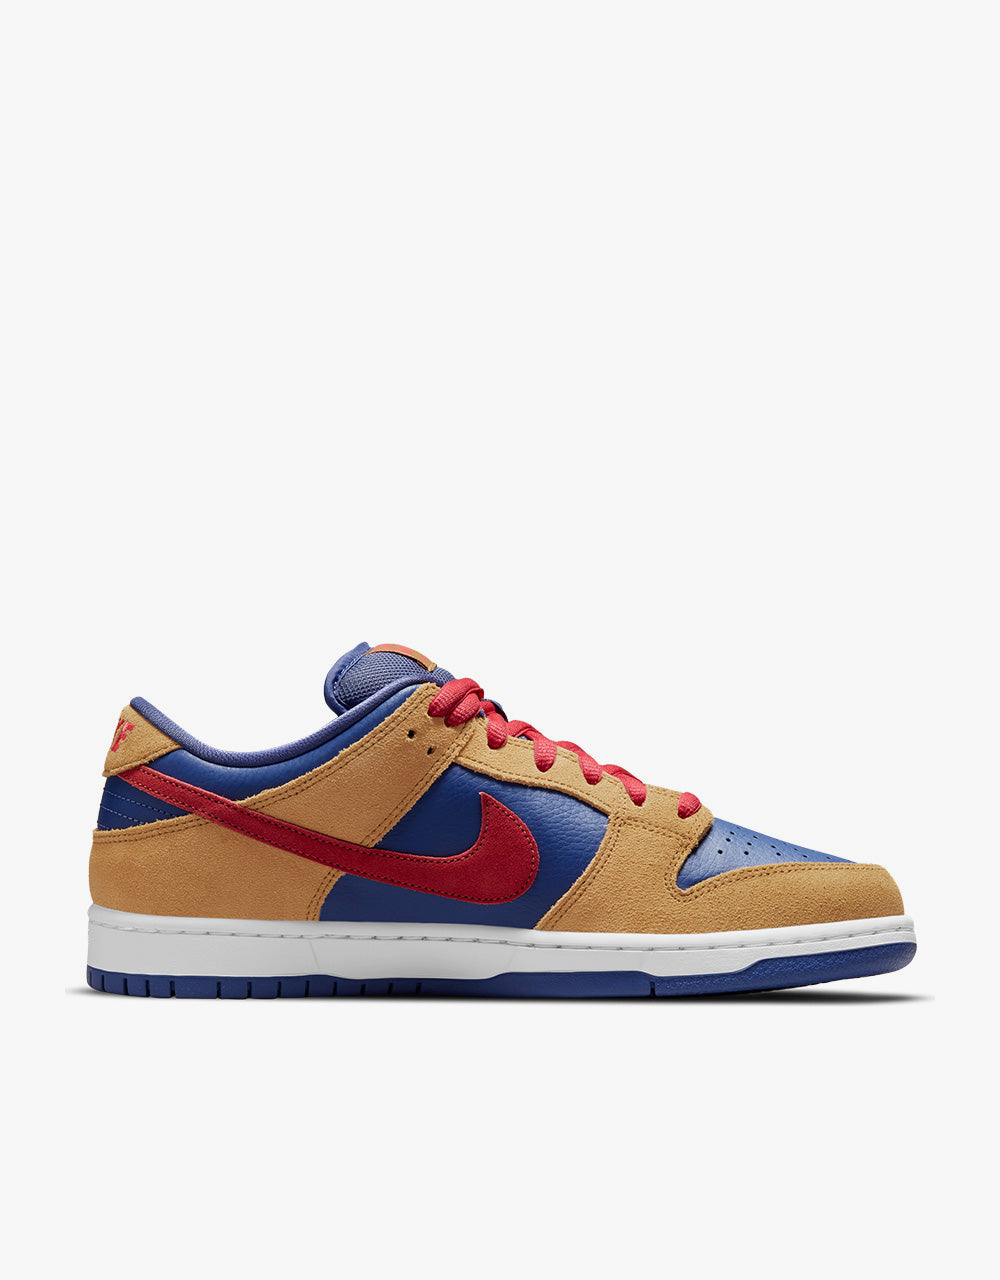 Nike SB 'Papa Bear' Dunk Low Pro – Route One Launches